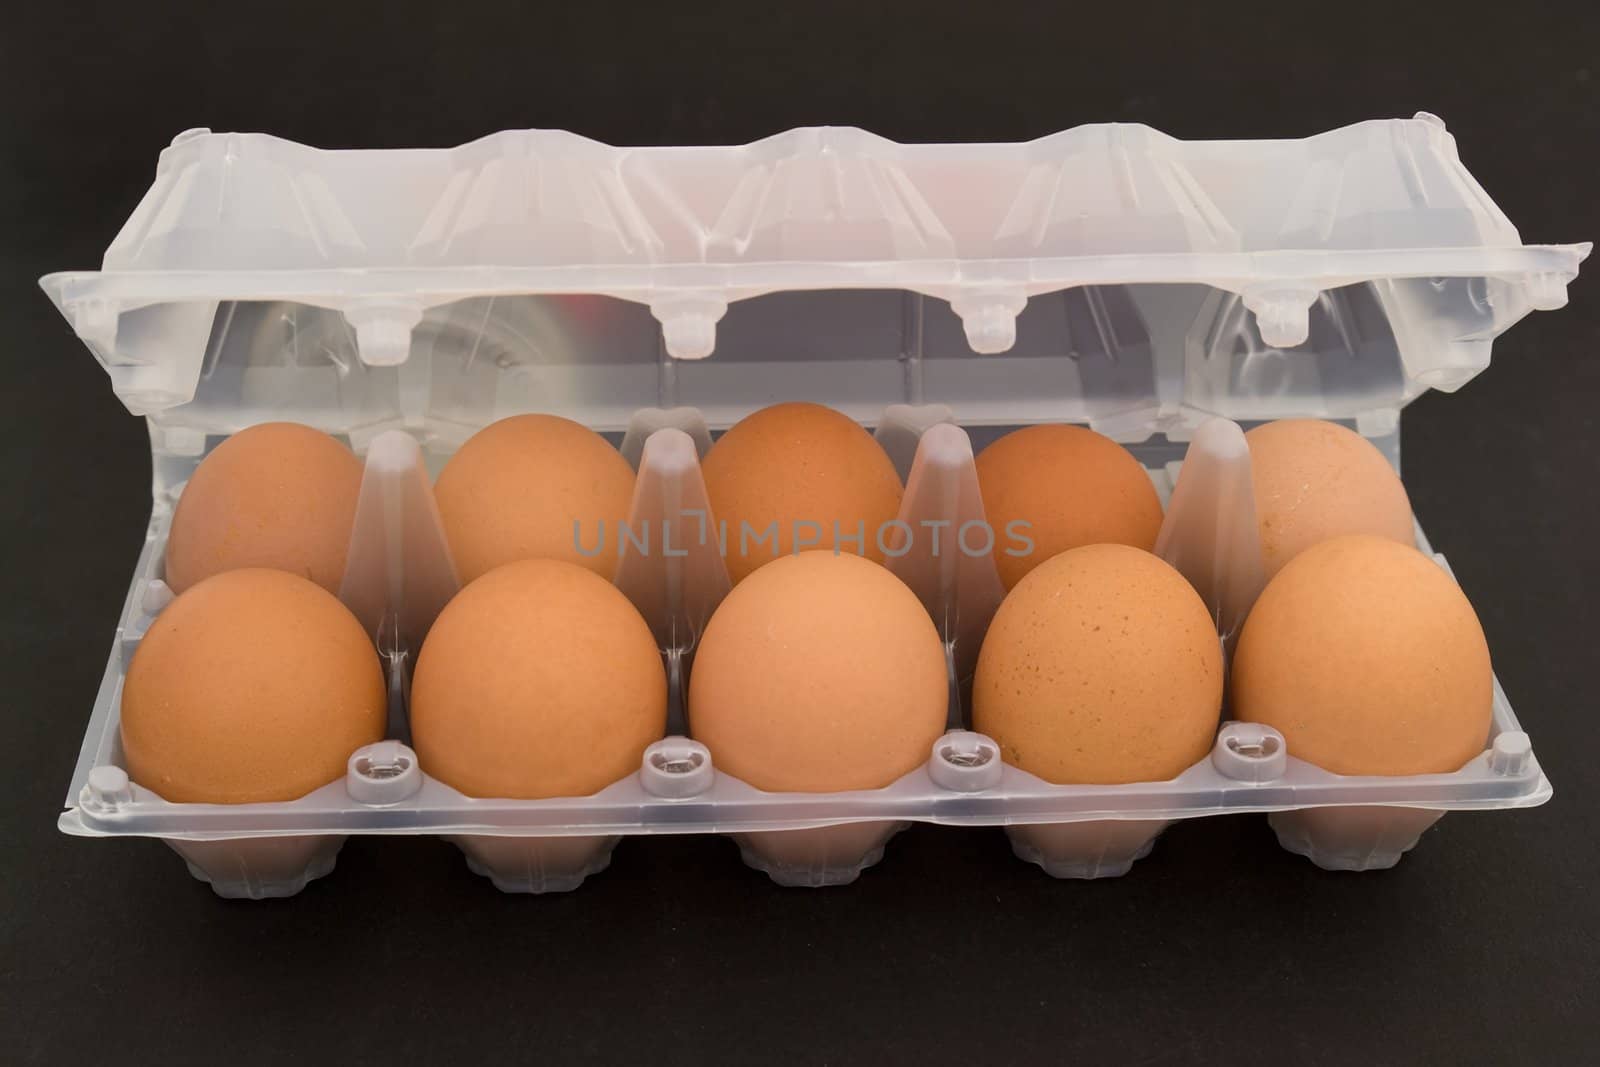 Ten eggs in packing by stepanov